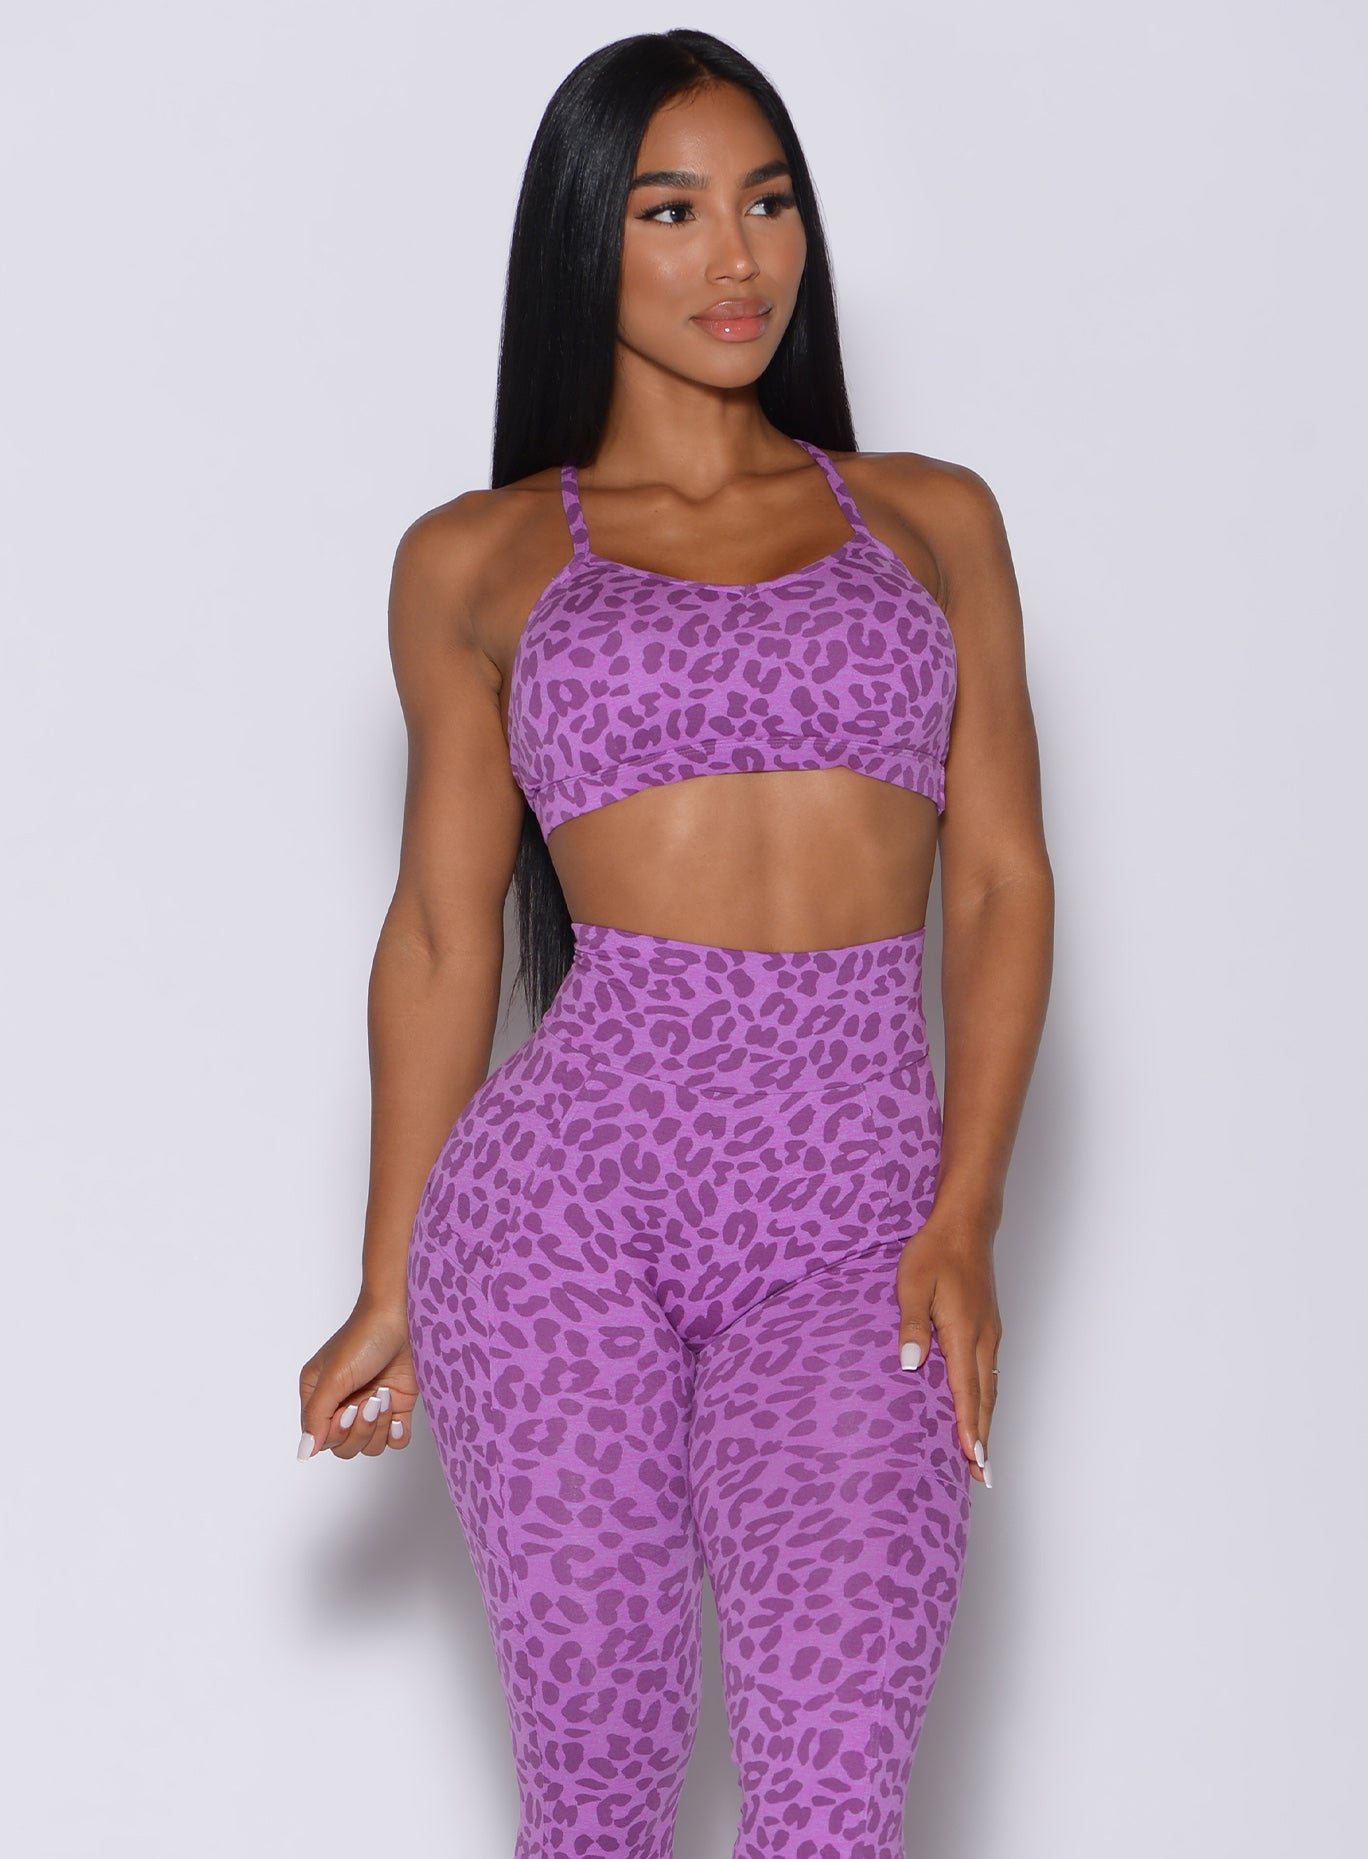 Front profile view of a model in our pumped sports bra in purple cheetah color and matching leggings